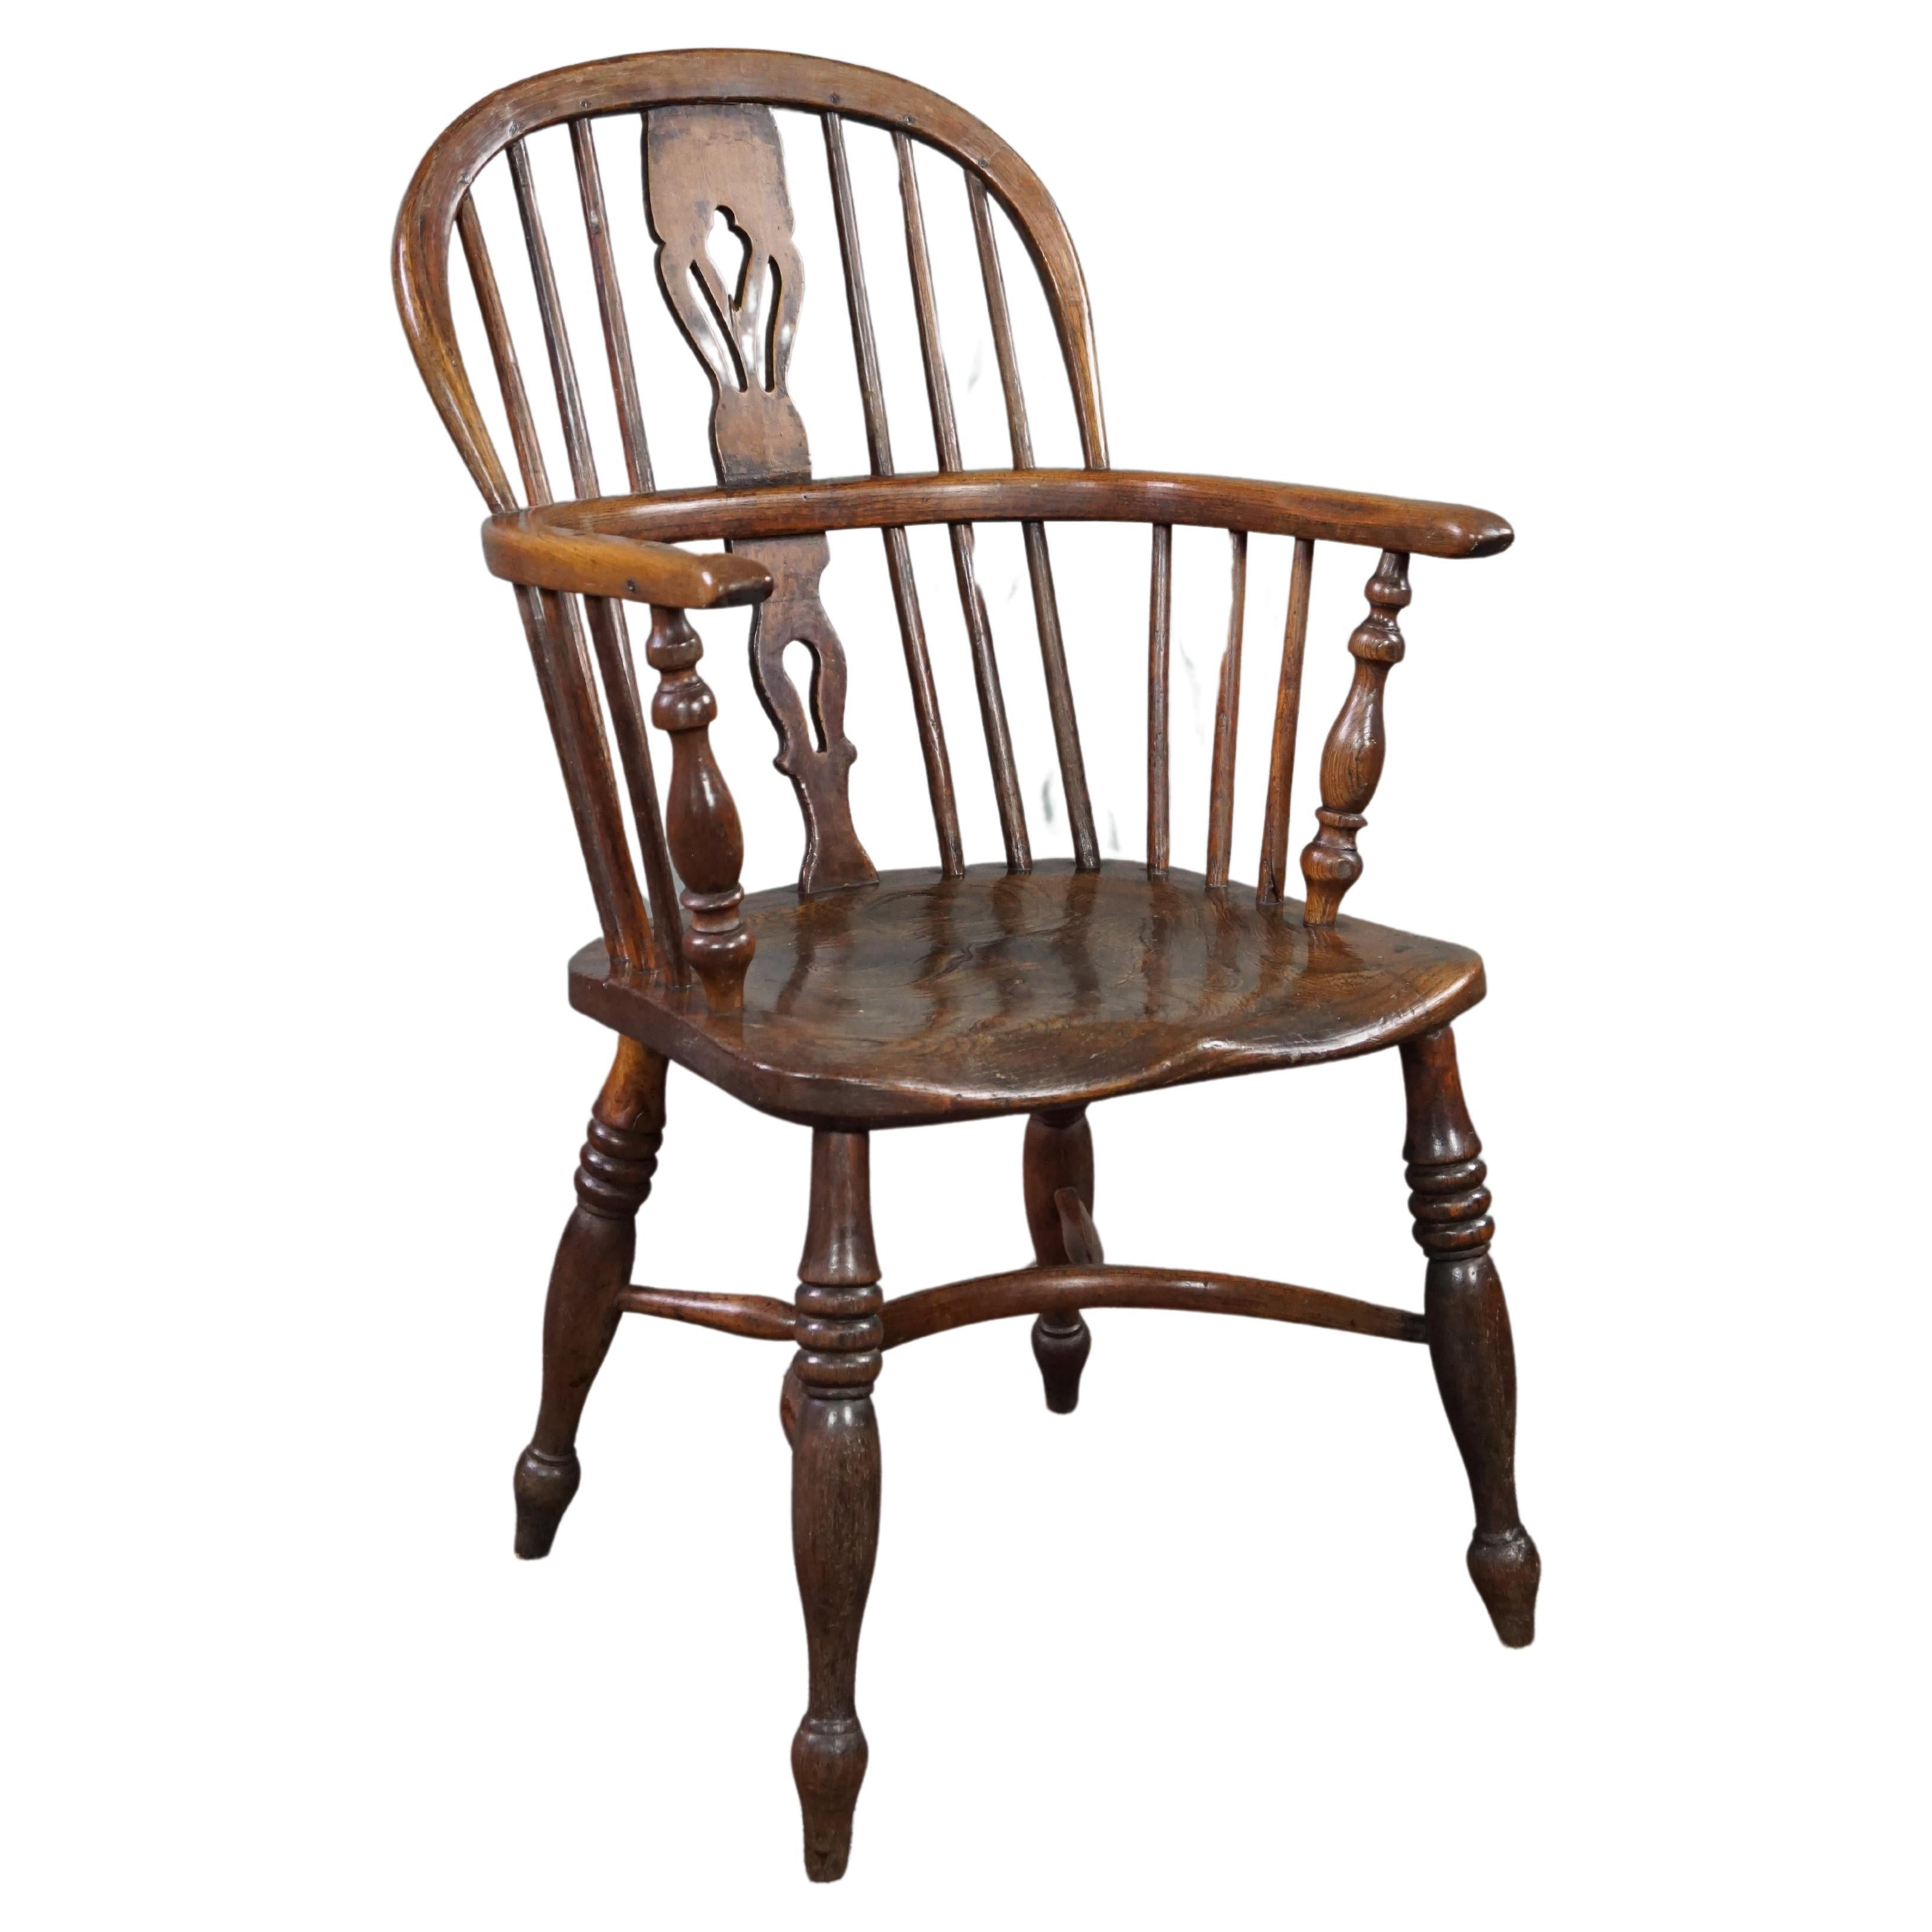 Antique English low back Windsor Armchair/armchair, 18th century